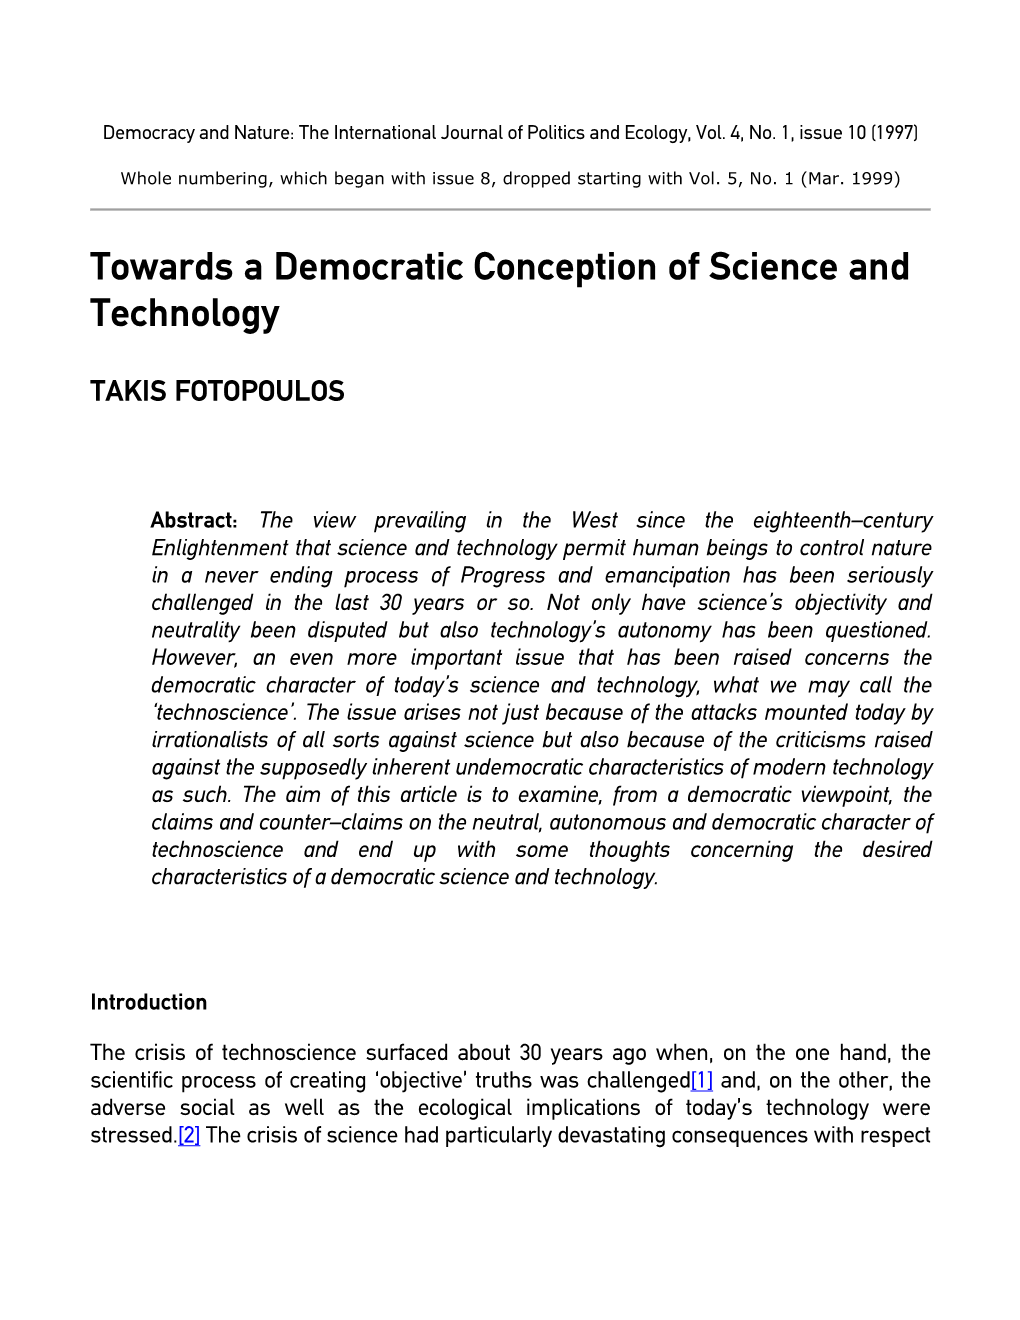 Towards a Democratic Conception of Science and Technology